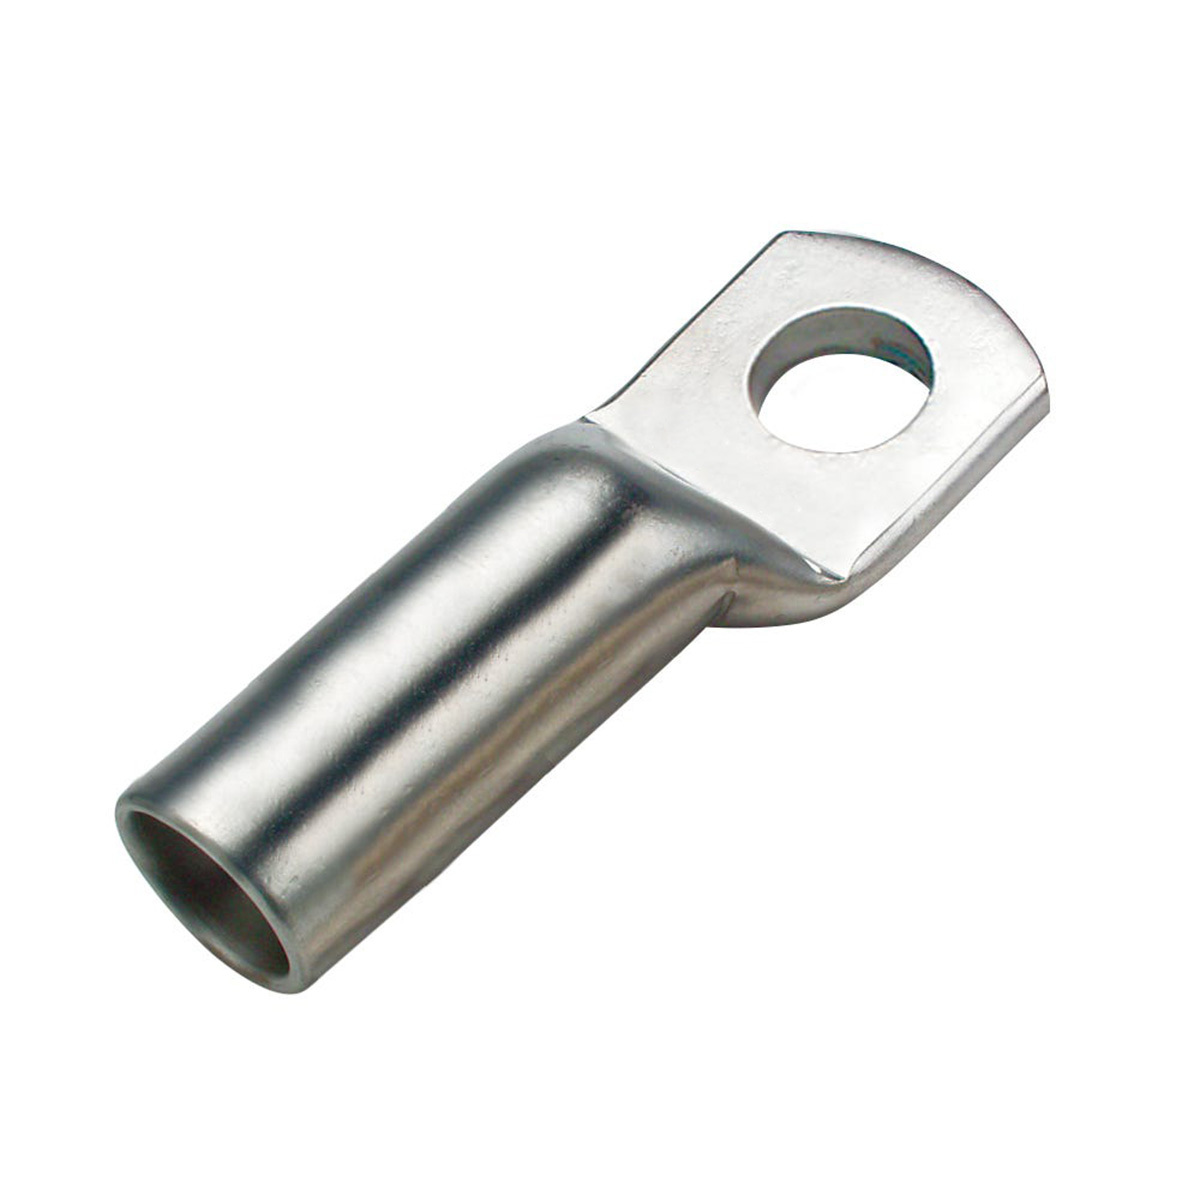 Copper Cable Lug [Cable Size:25 sq mm;Hole Diameter:6 mm ]